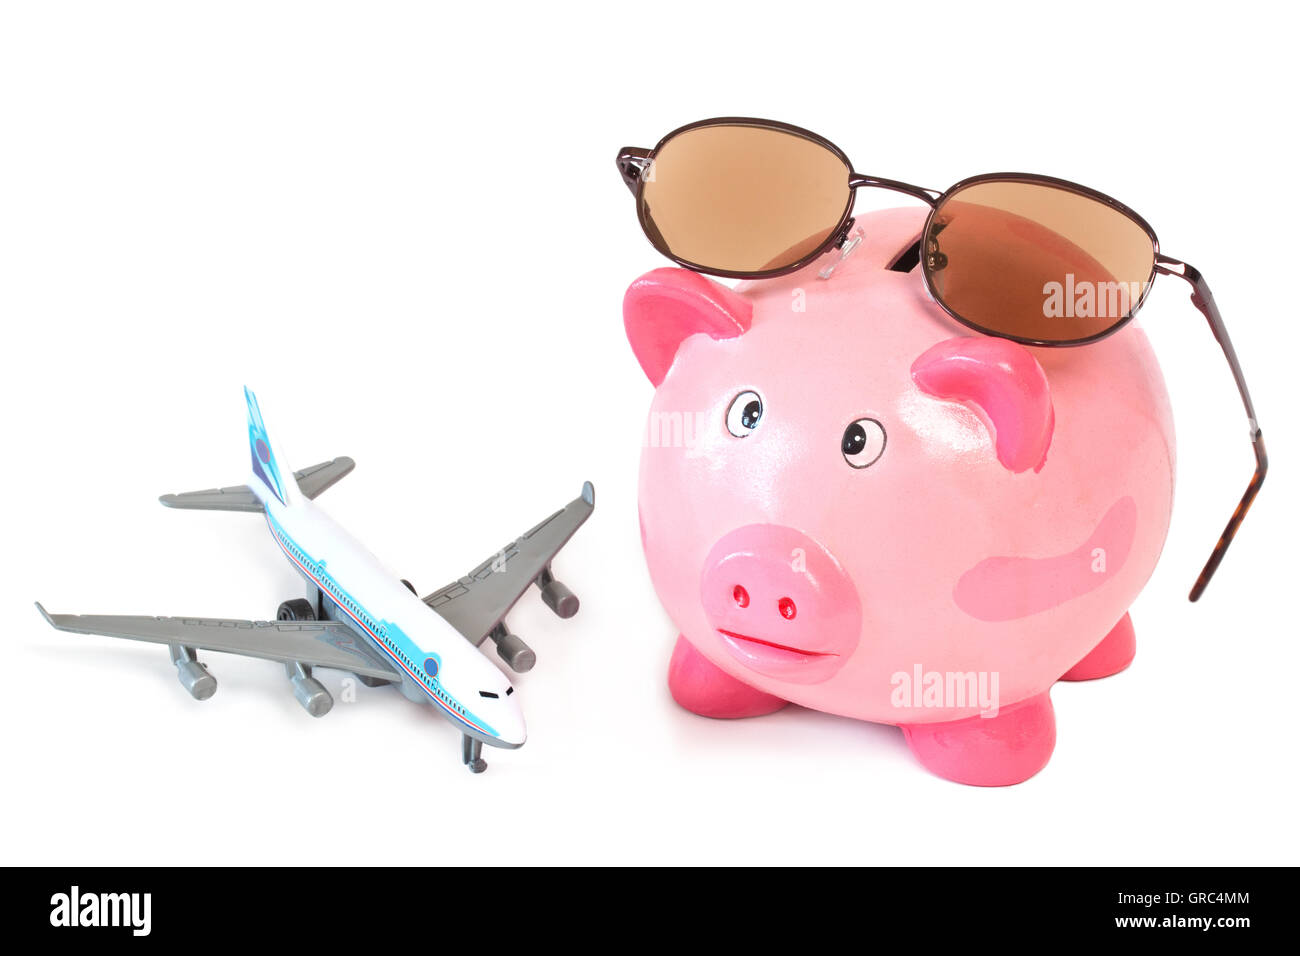 Piggy Bank With Sunglasses And Toy Plane On White Background Stock Photo